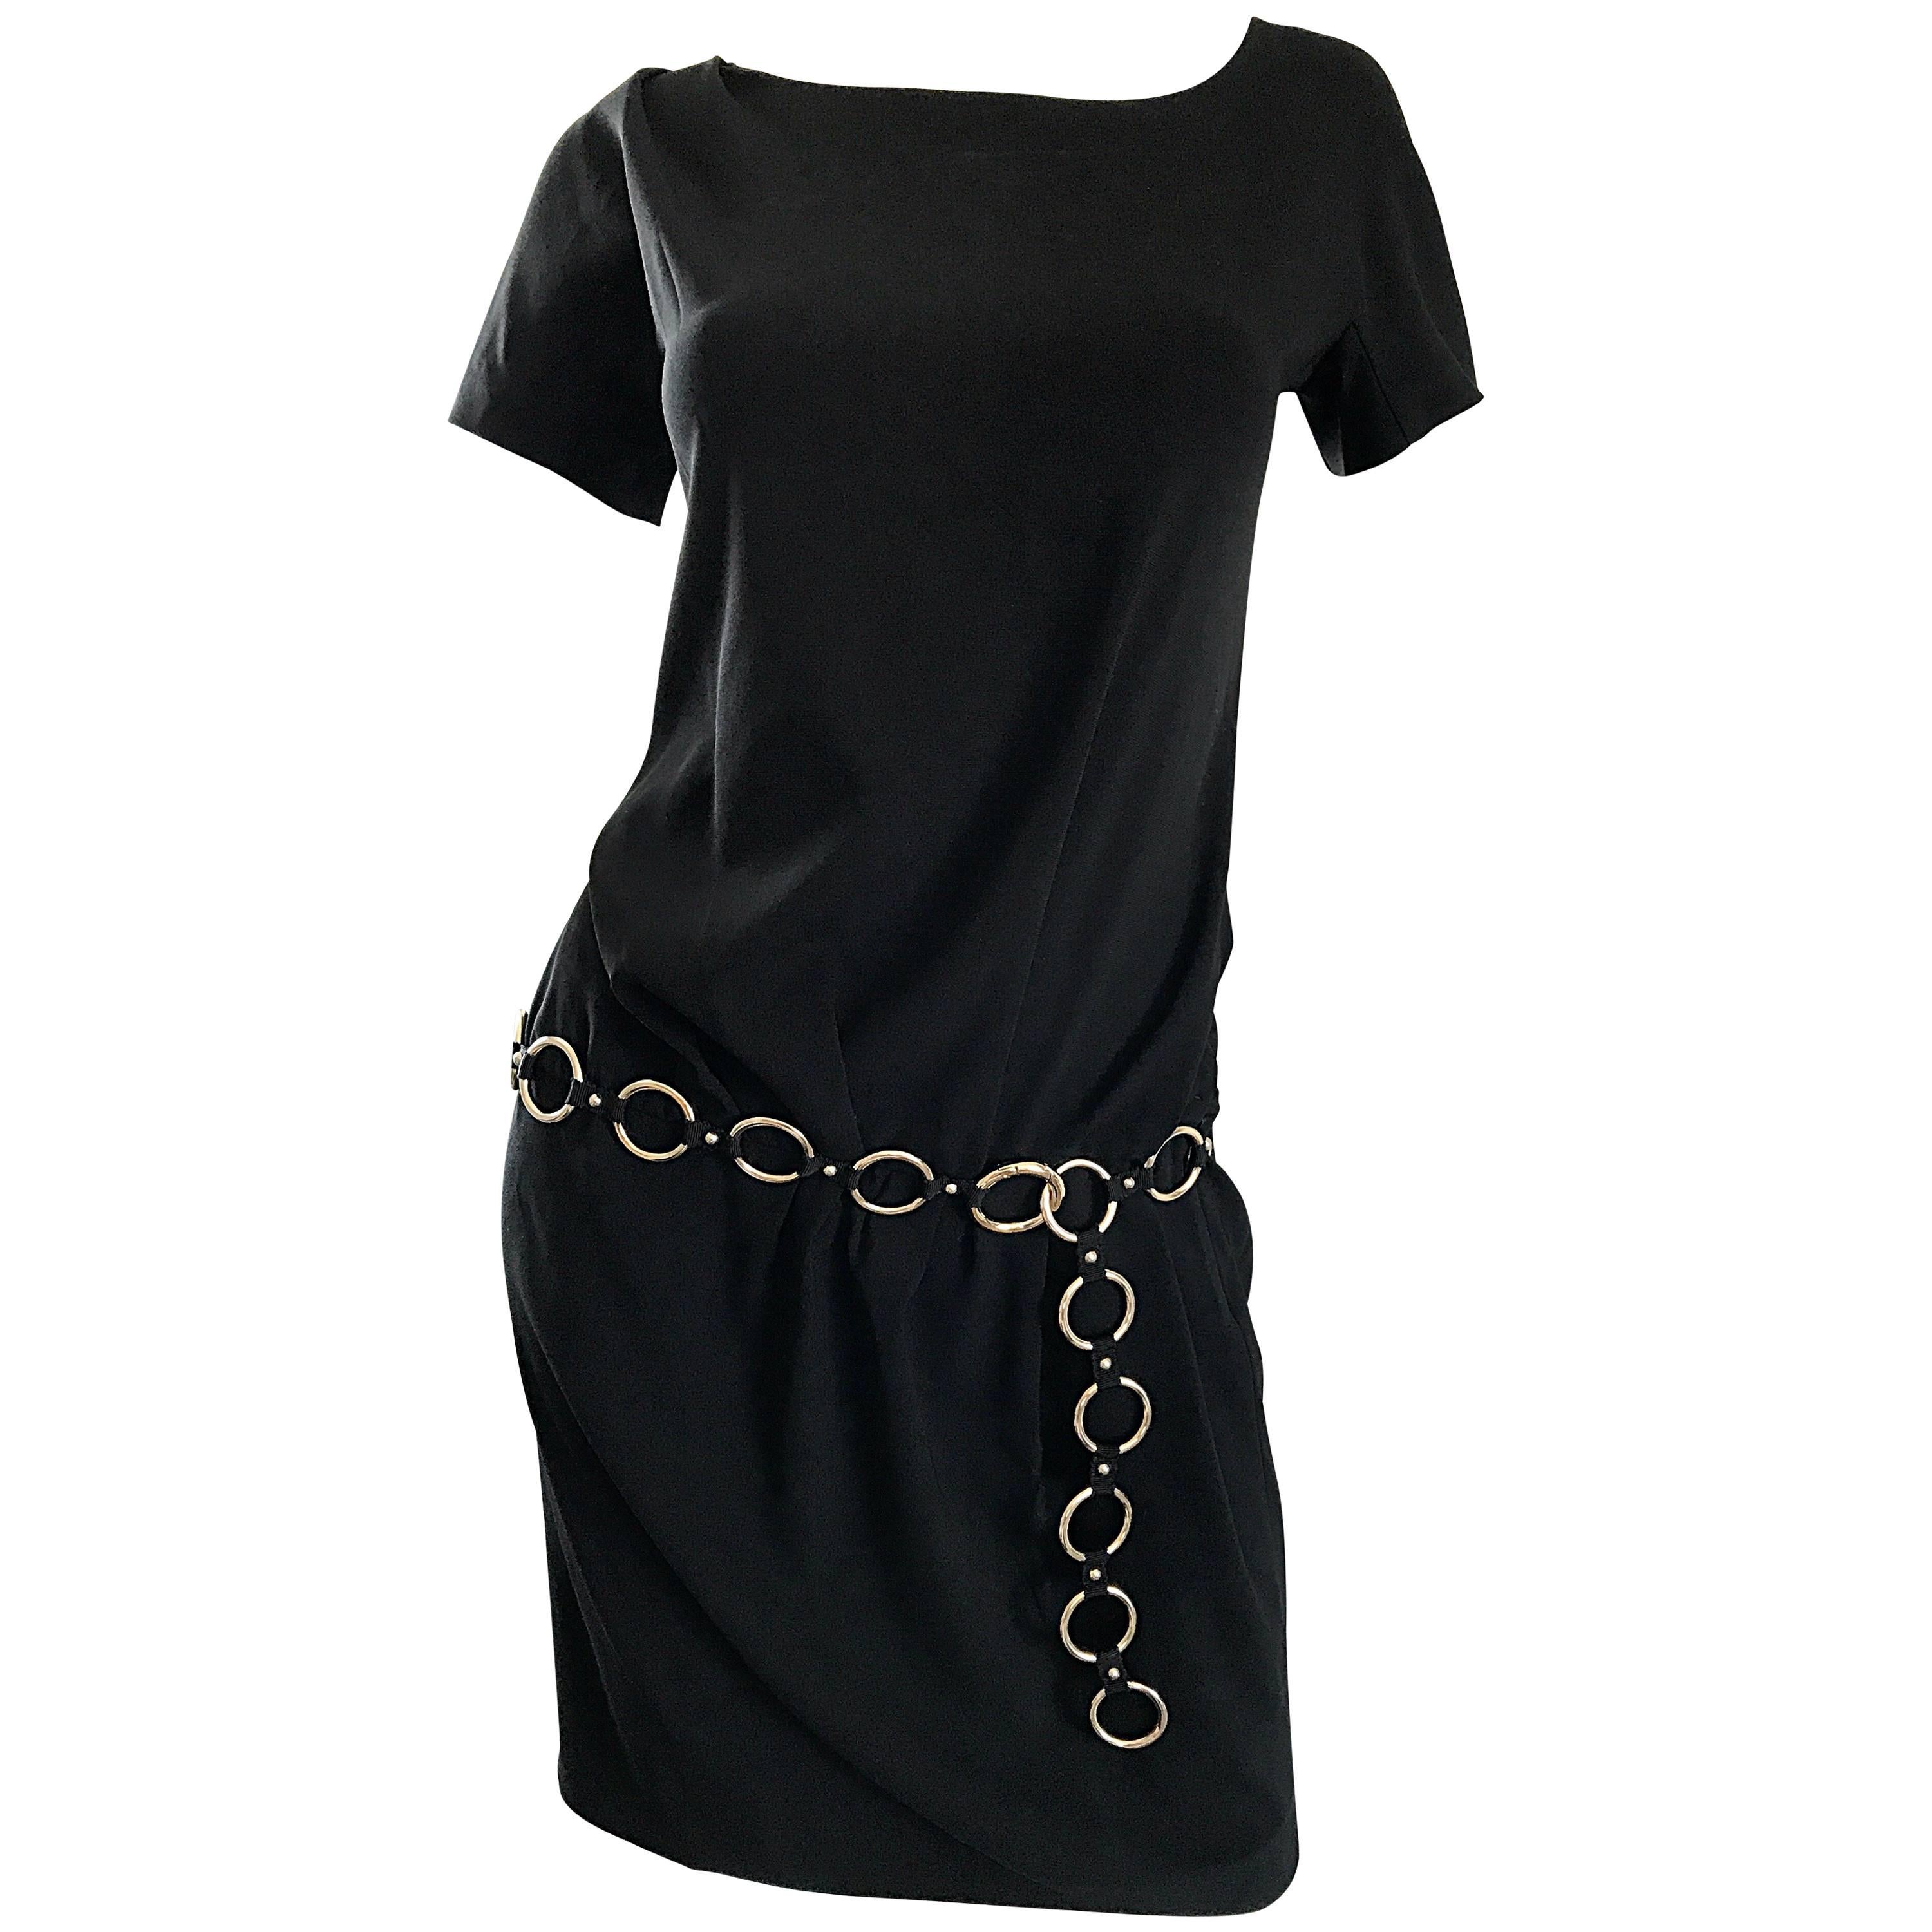 1990s Moschino Cheap & Chic Black Silver Chain Loop Belt Vintage Dress Size 6  For Sale